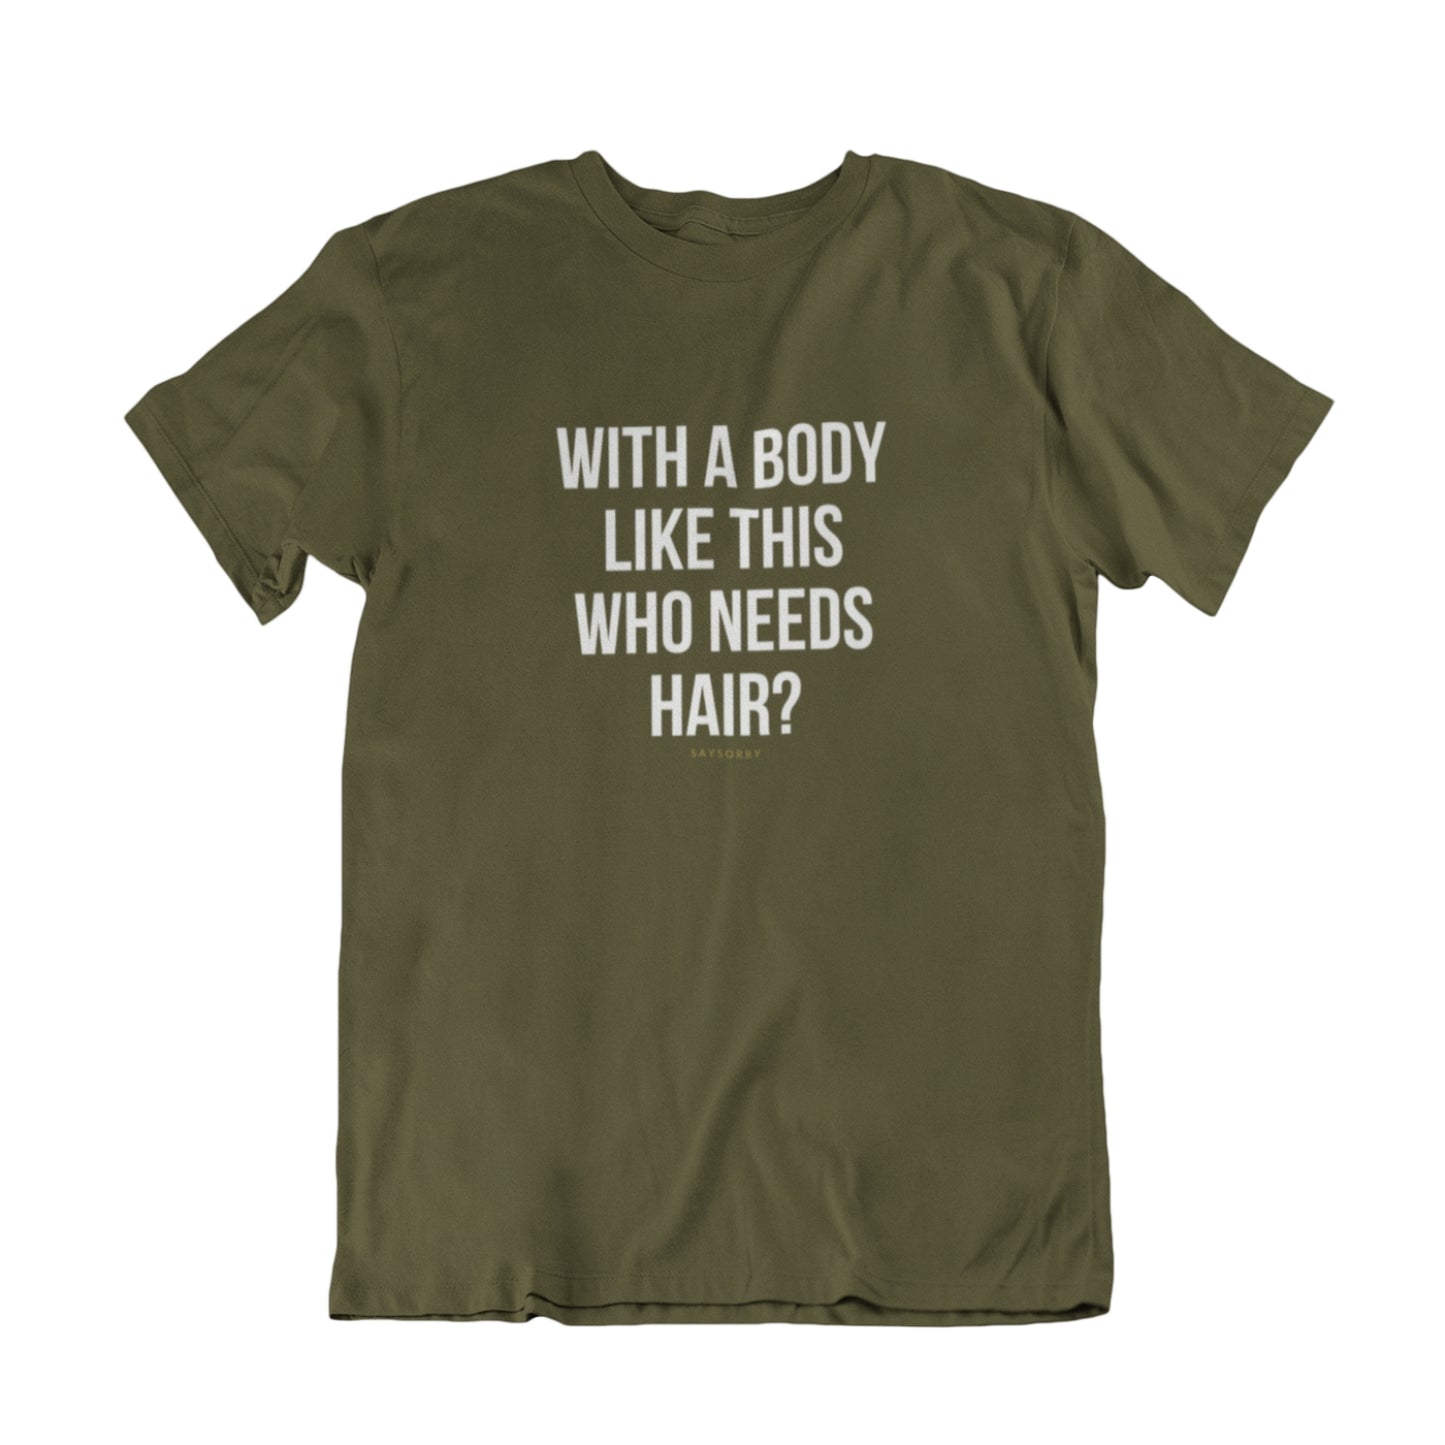 100% Organic Herren Shirt »With a body like this who needs hair?«